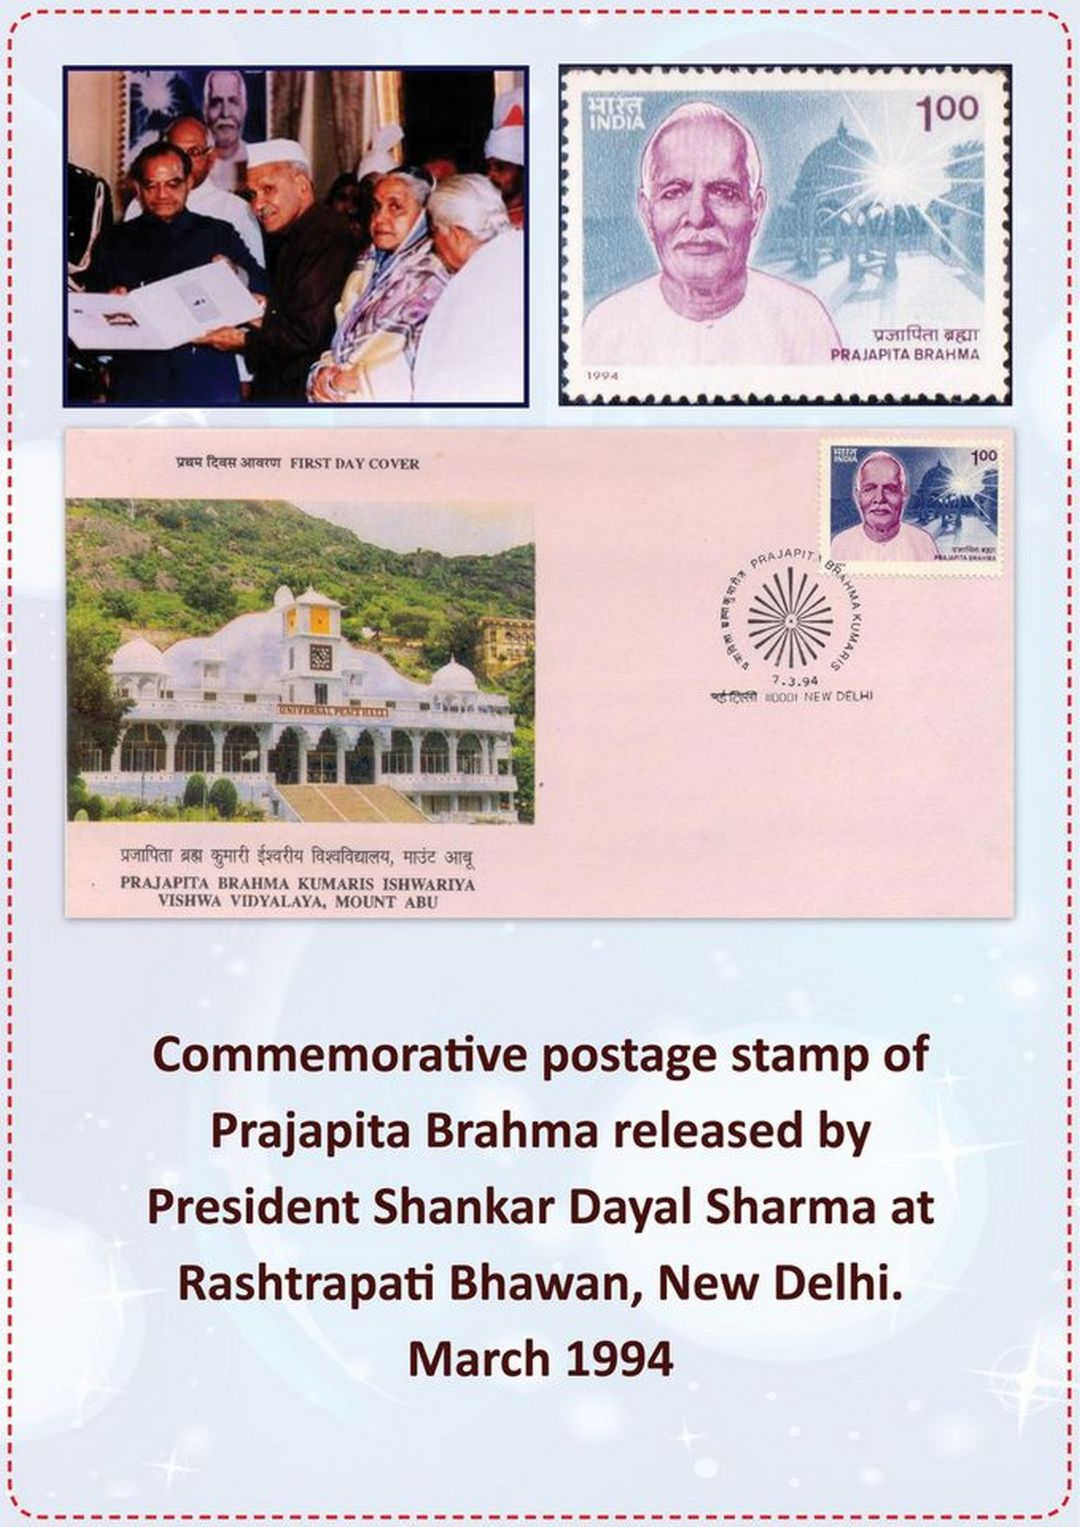 1st day cover - 1